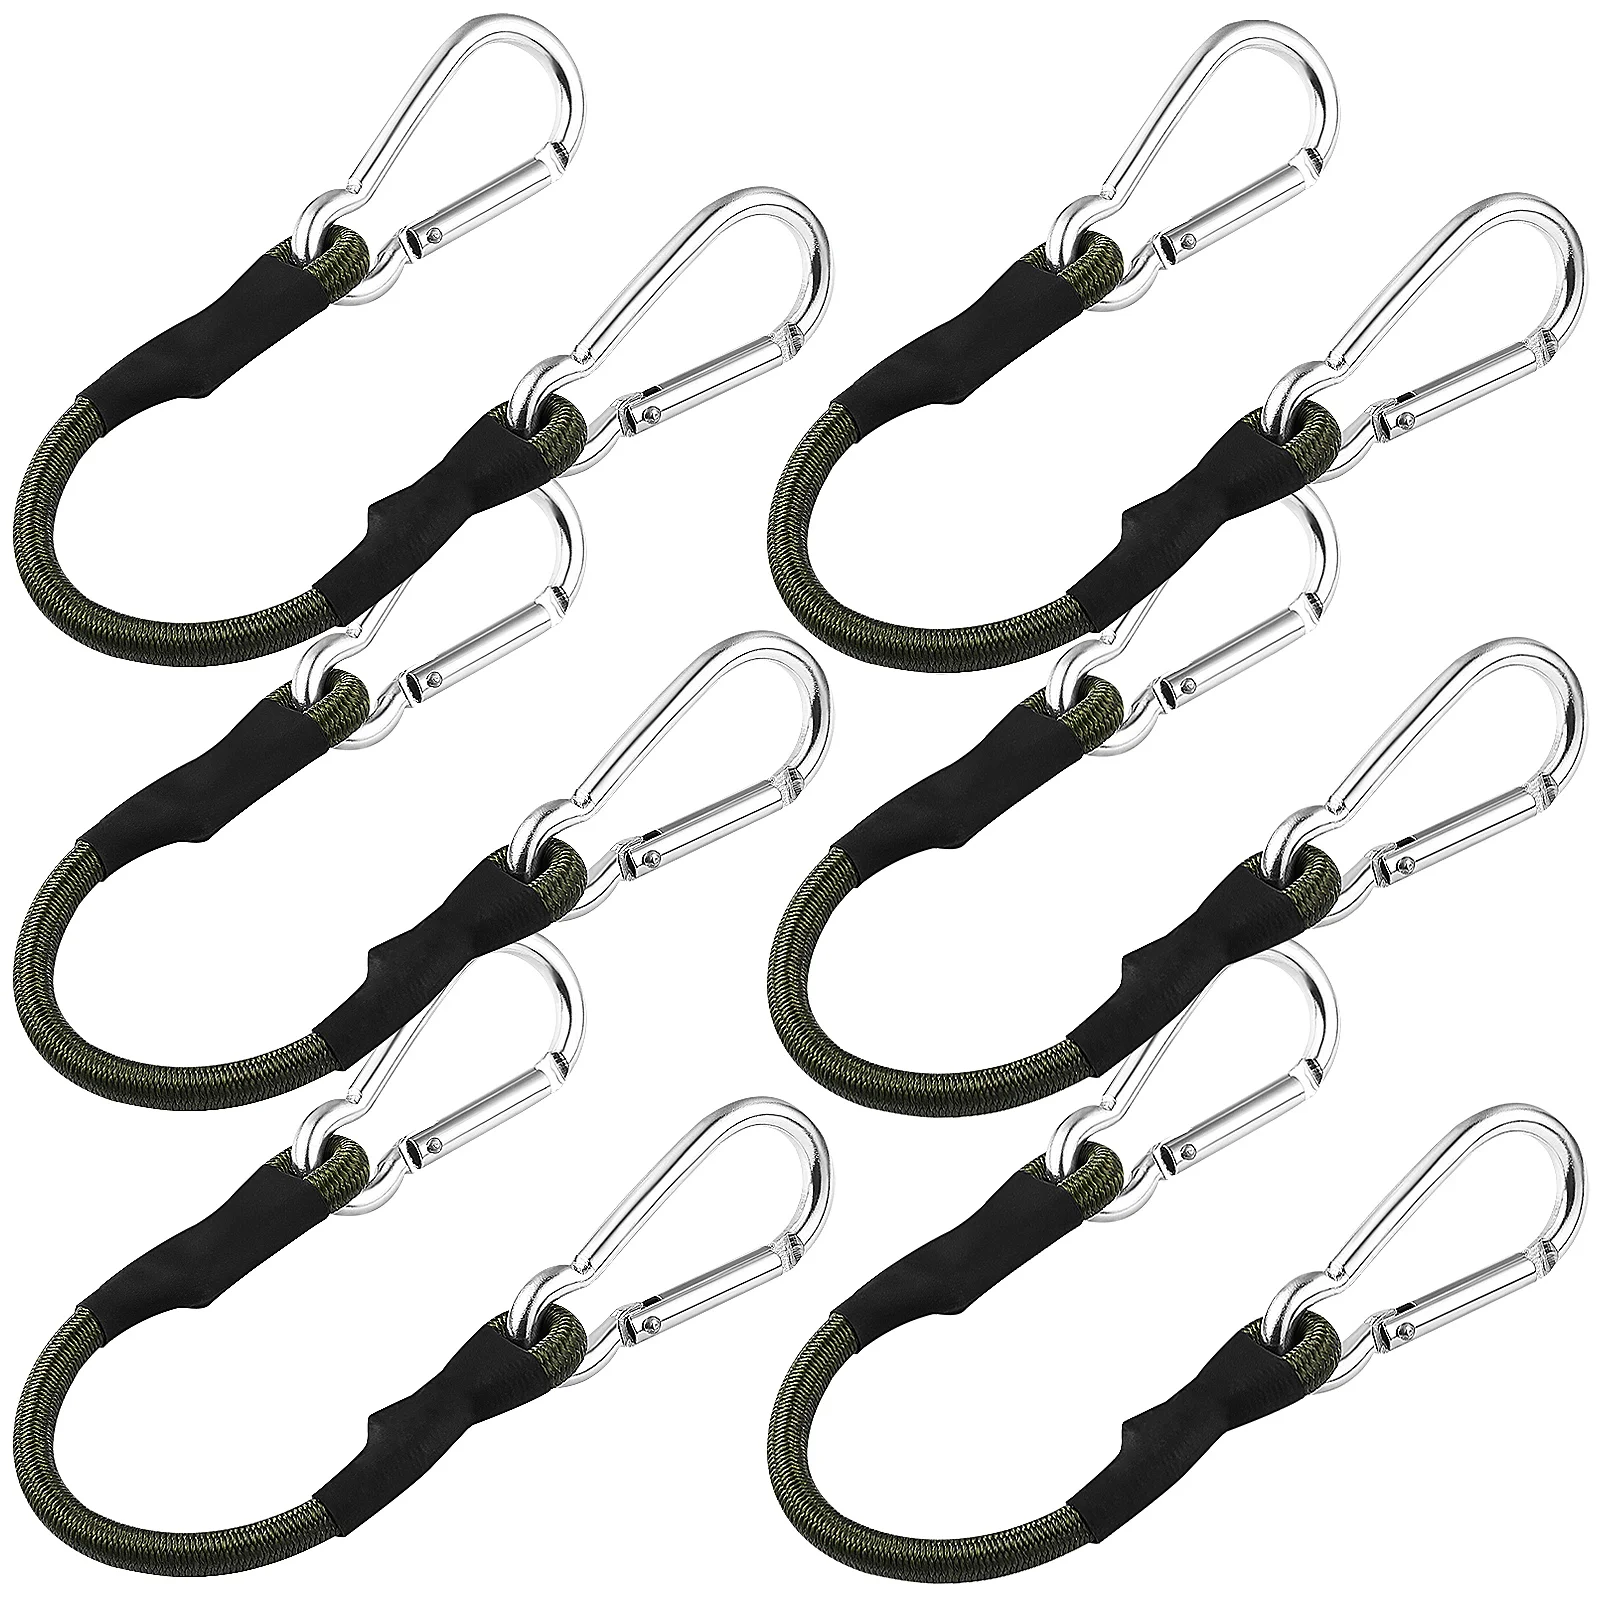 

6 Pcs Bungee Cords with Hooks Elastic Luggage Ropes Tent Fixing Belts Multi-functional Binding Belt